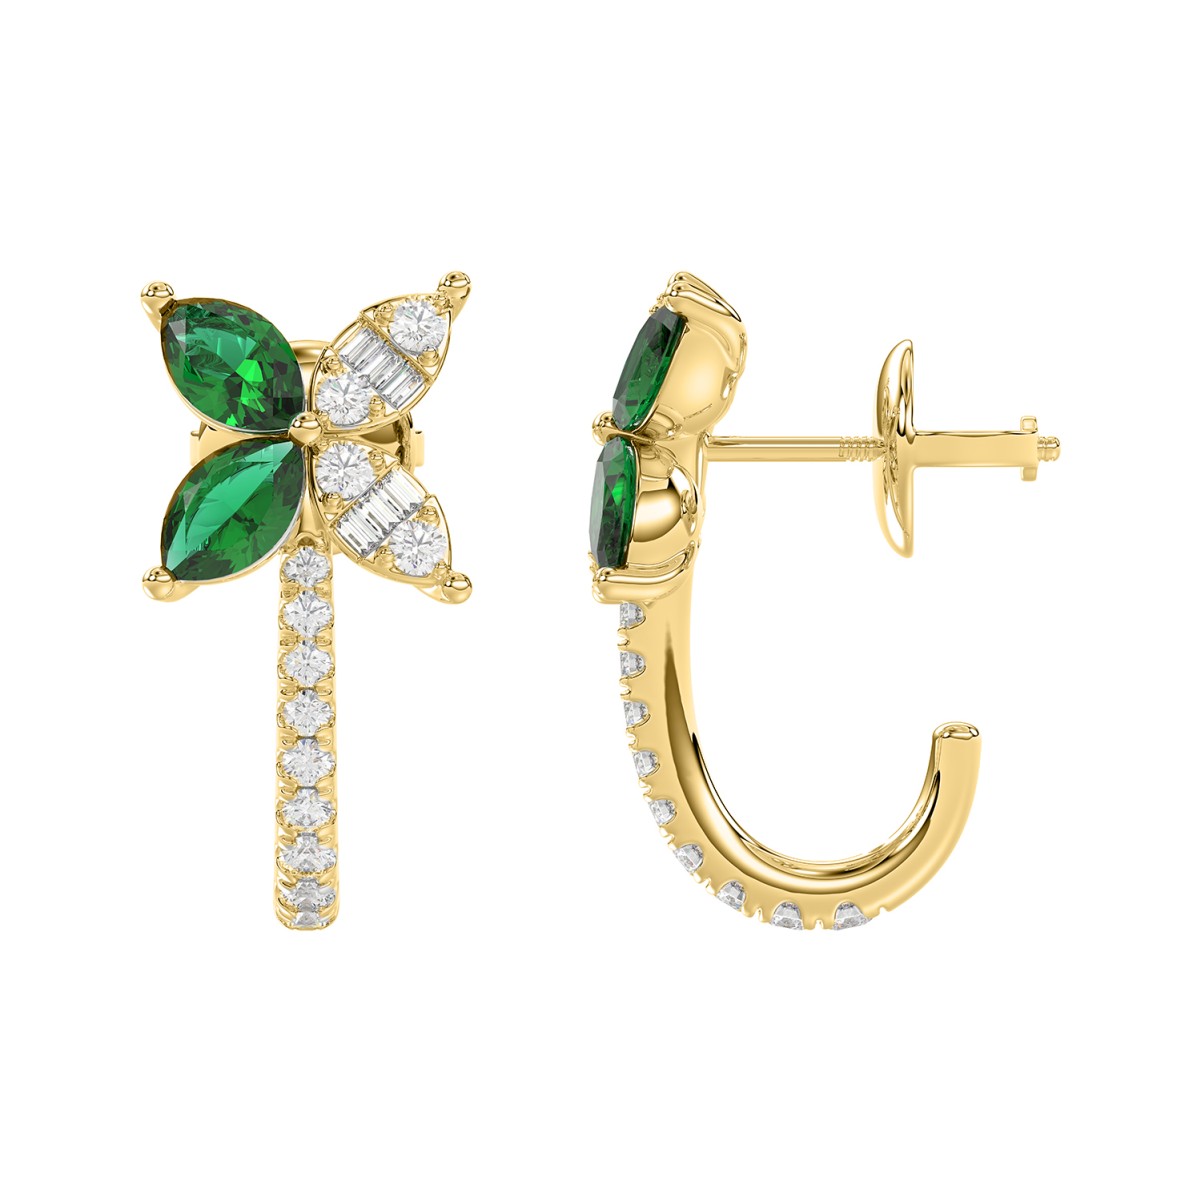 14K YELLOW GOLD 1/3CT ROUND/BAGUETTE/MARQUISE DIAMOND LADIES EARRINGS(COLOR STONE MARQUISE GREEN EMERALD DIAMOND 3/4CT)